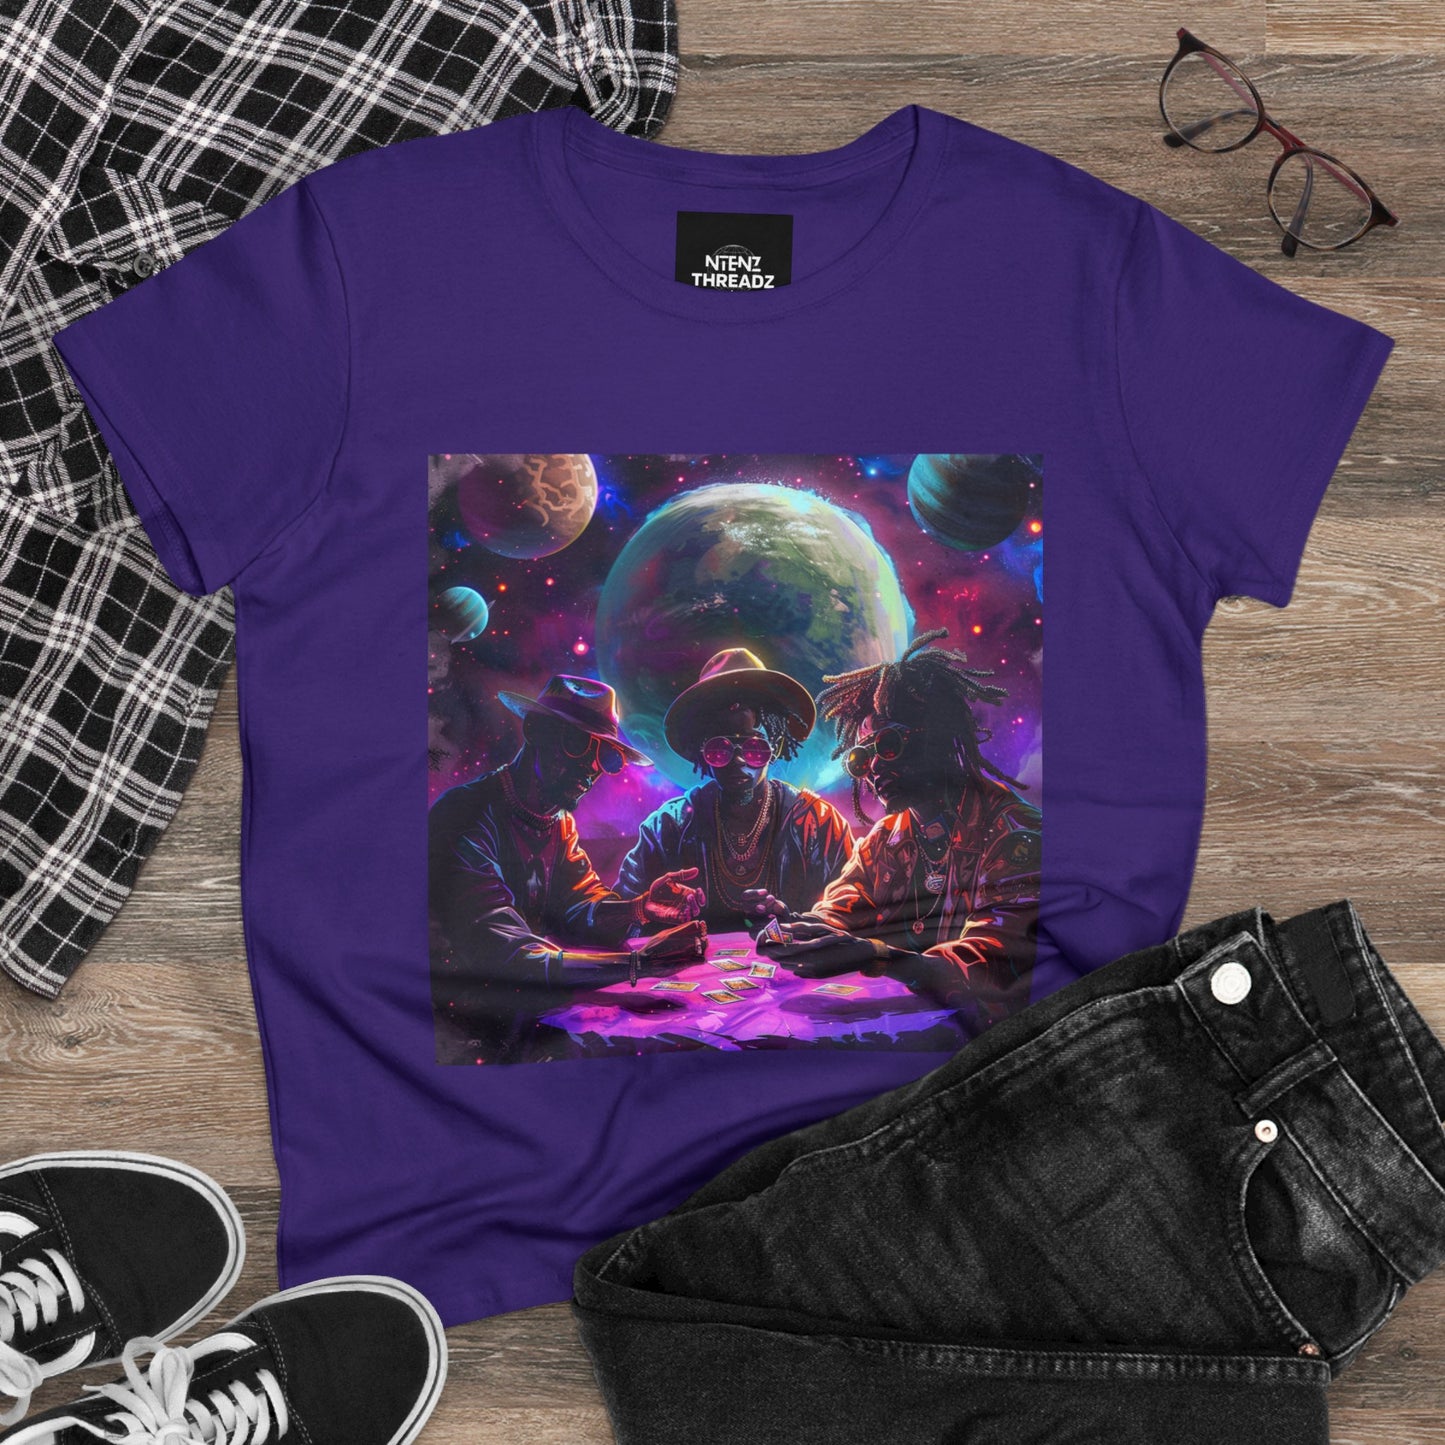 Cosmic Wager: Women's Midweight Cotton Tee